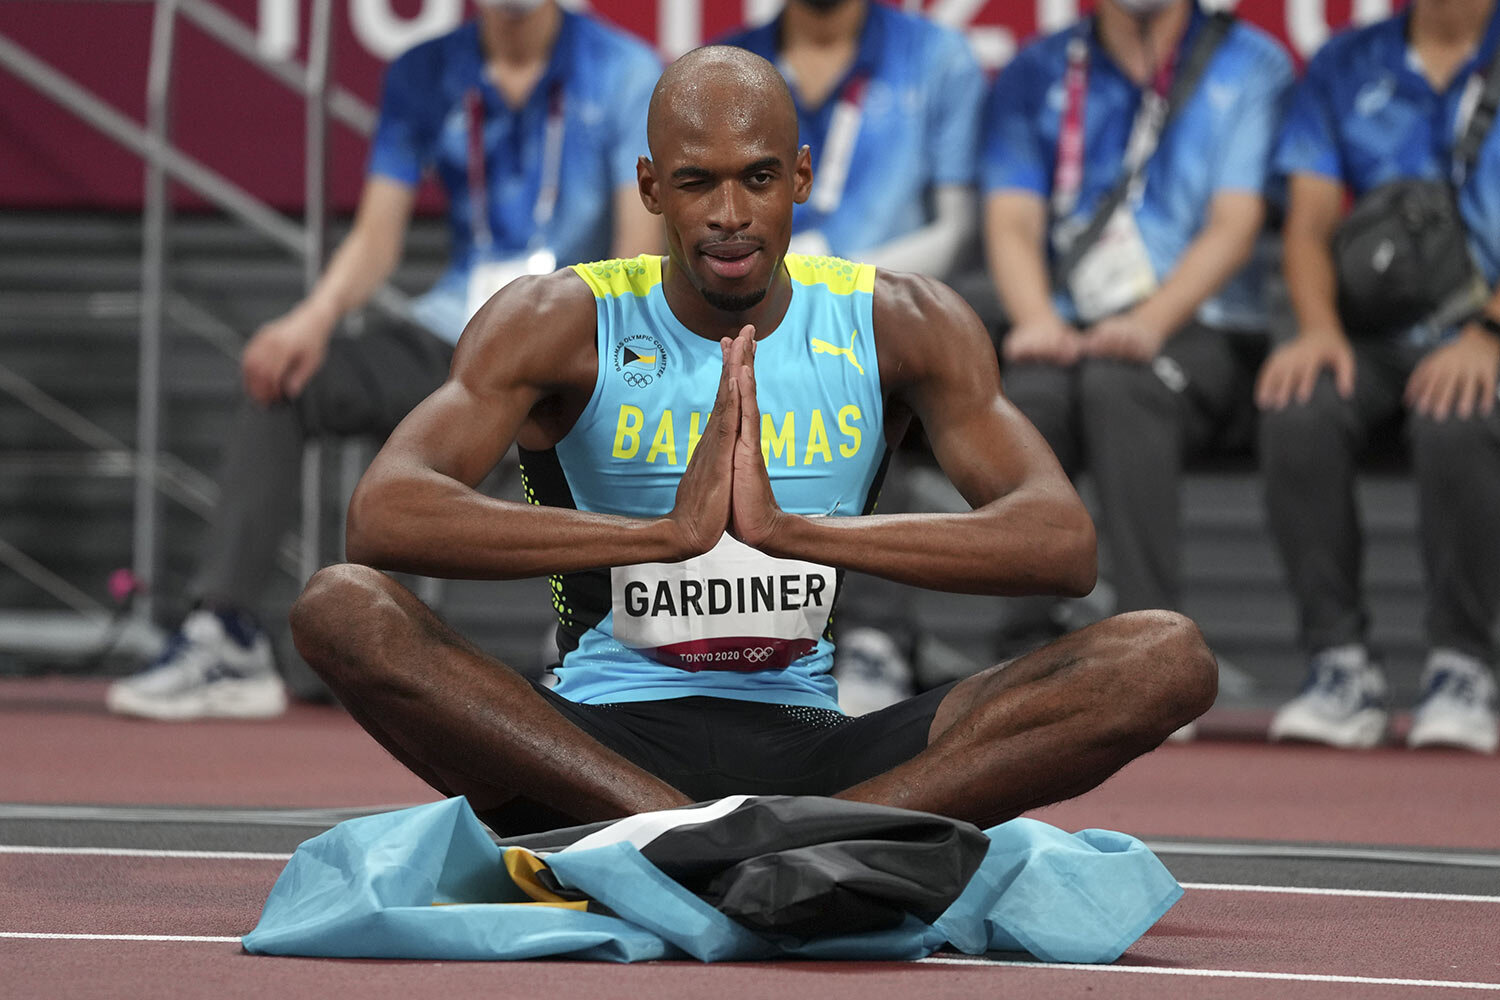  Steven Gardiner, of the Bahamas, reacts after winning the final of the men's 400-meters at the 2020 Summer Olympics, Thursday, Aug. 5, 2021, in Tokyo. (AP Photo/Matthias Schrader) 